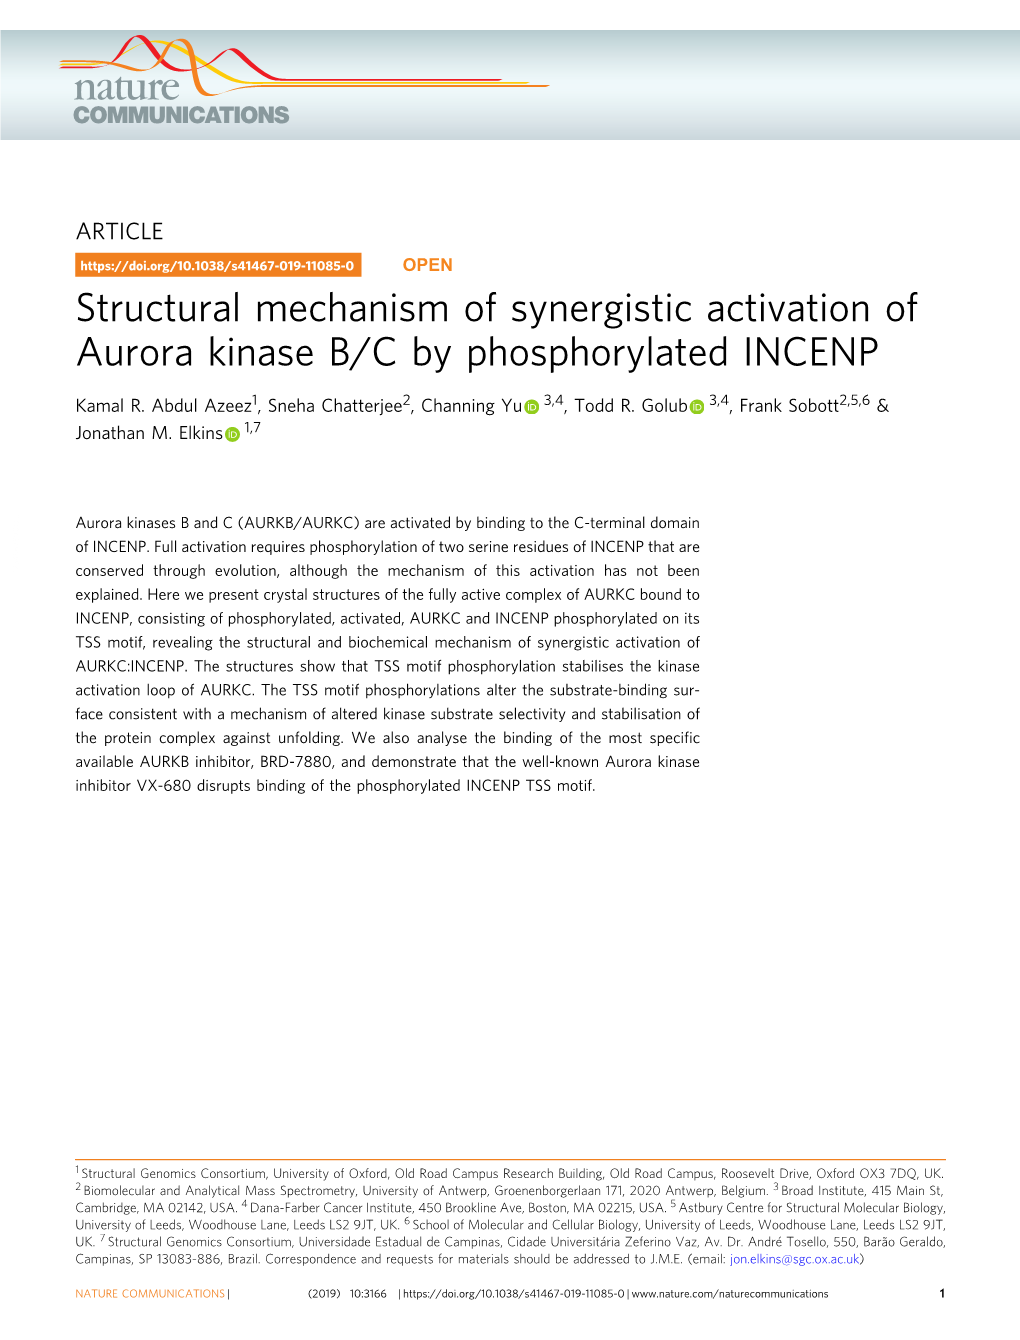 Structural Mechanism of Synergistic Activation of Aurora Kinase B/C by Phosphorylated INCENP